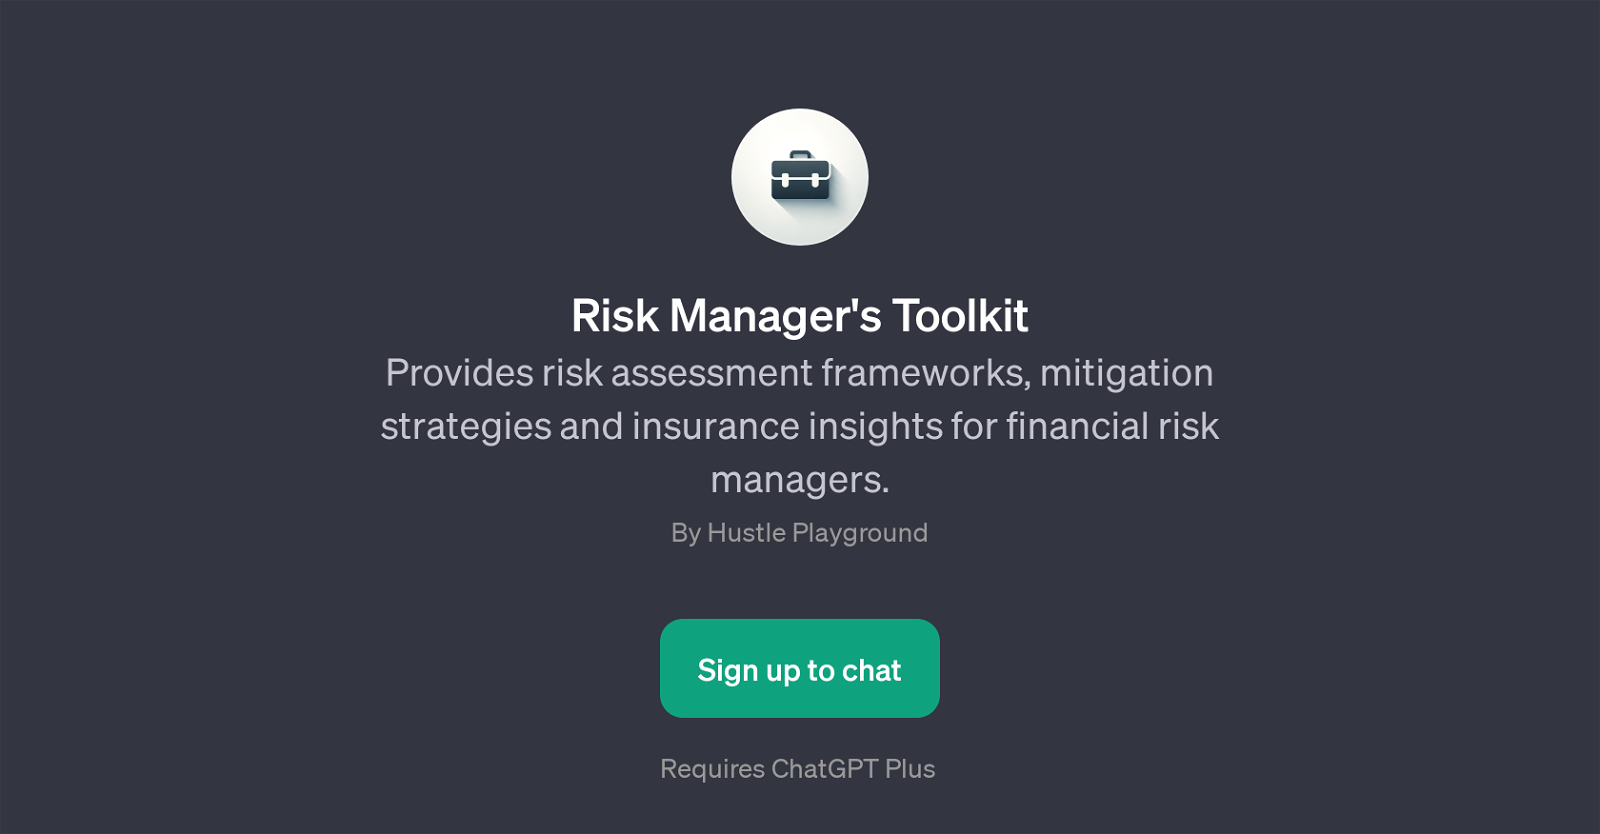 Risk Manager's Toolkit website